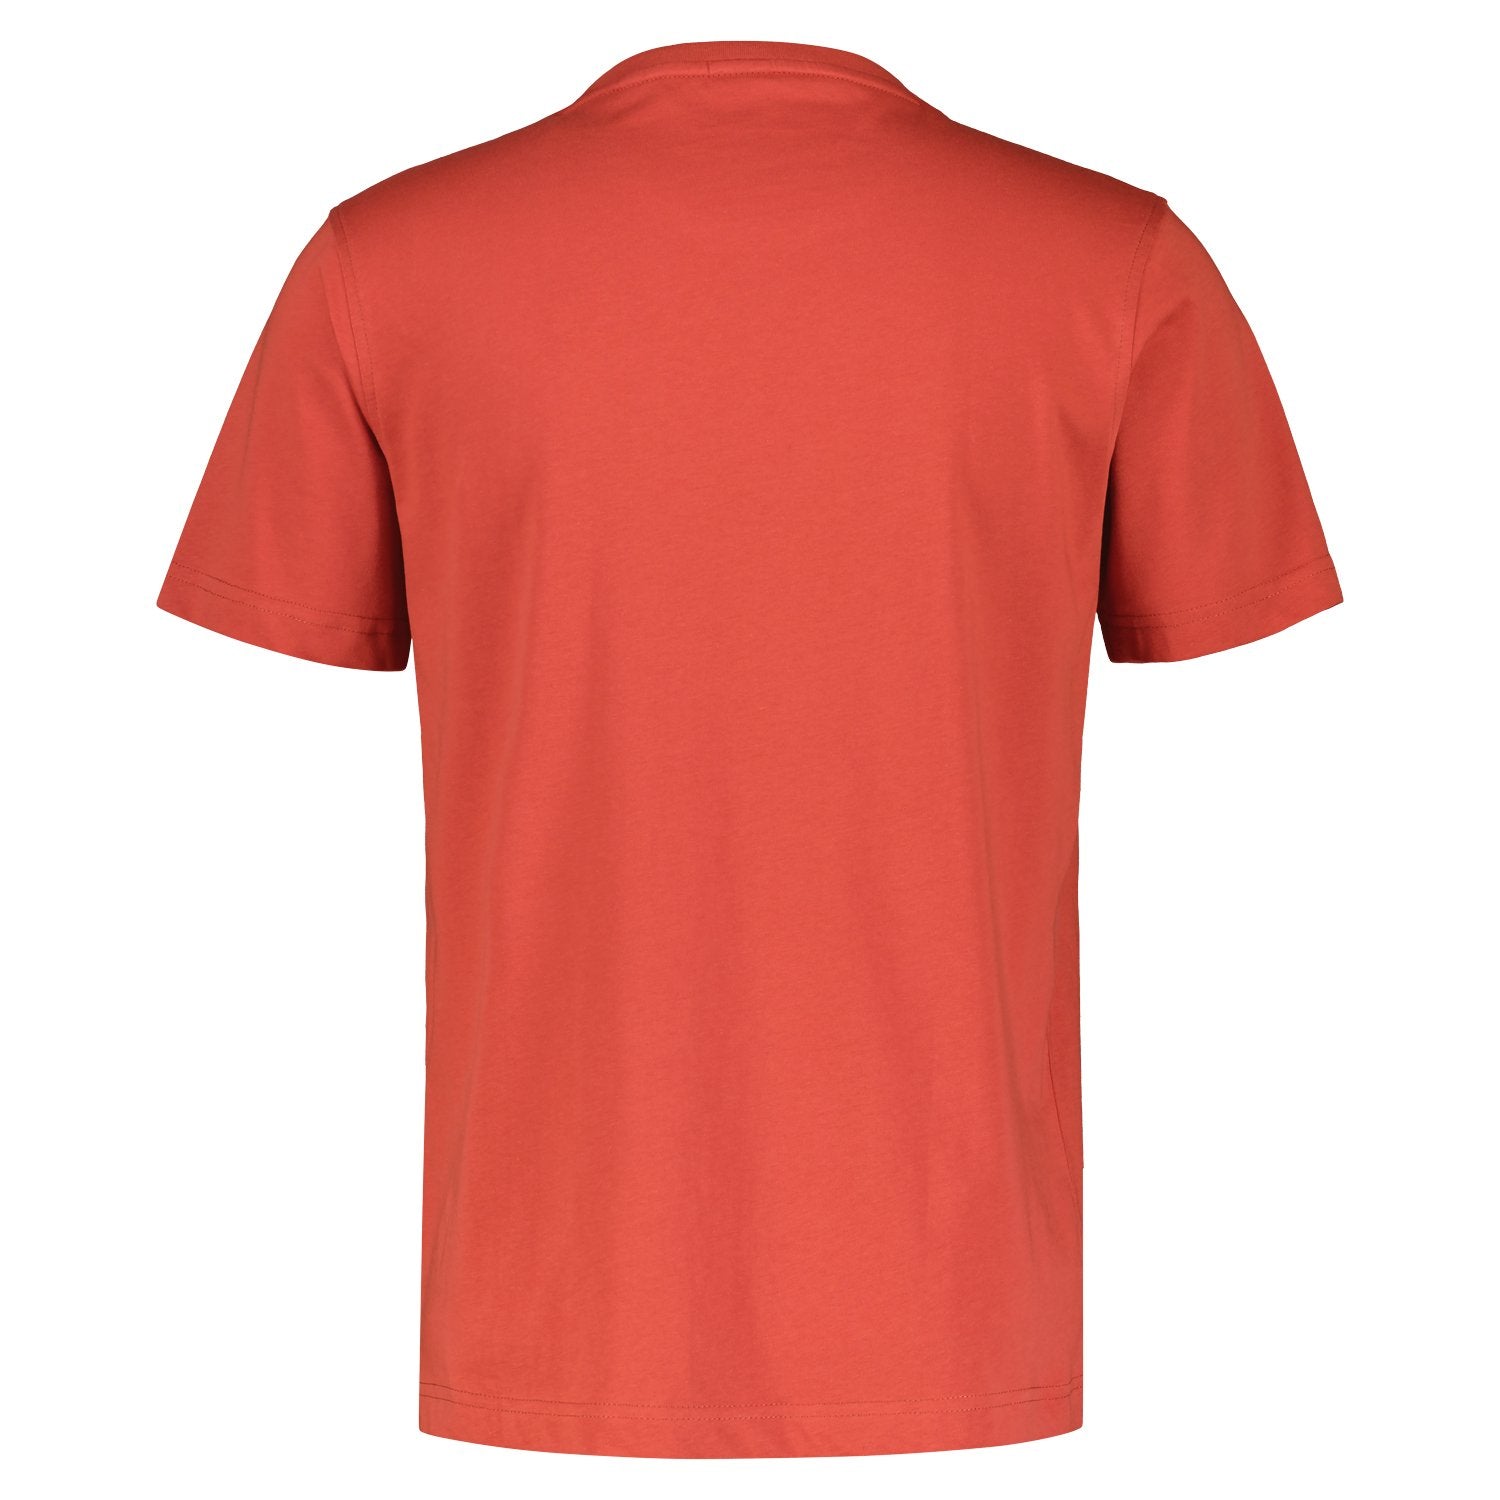 O-neck (Deep Coral Red)